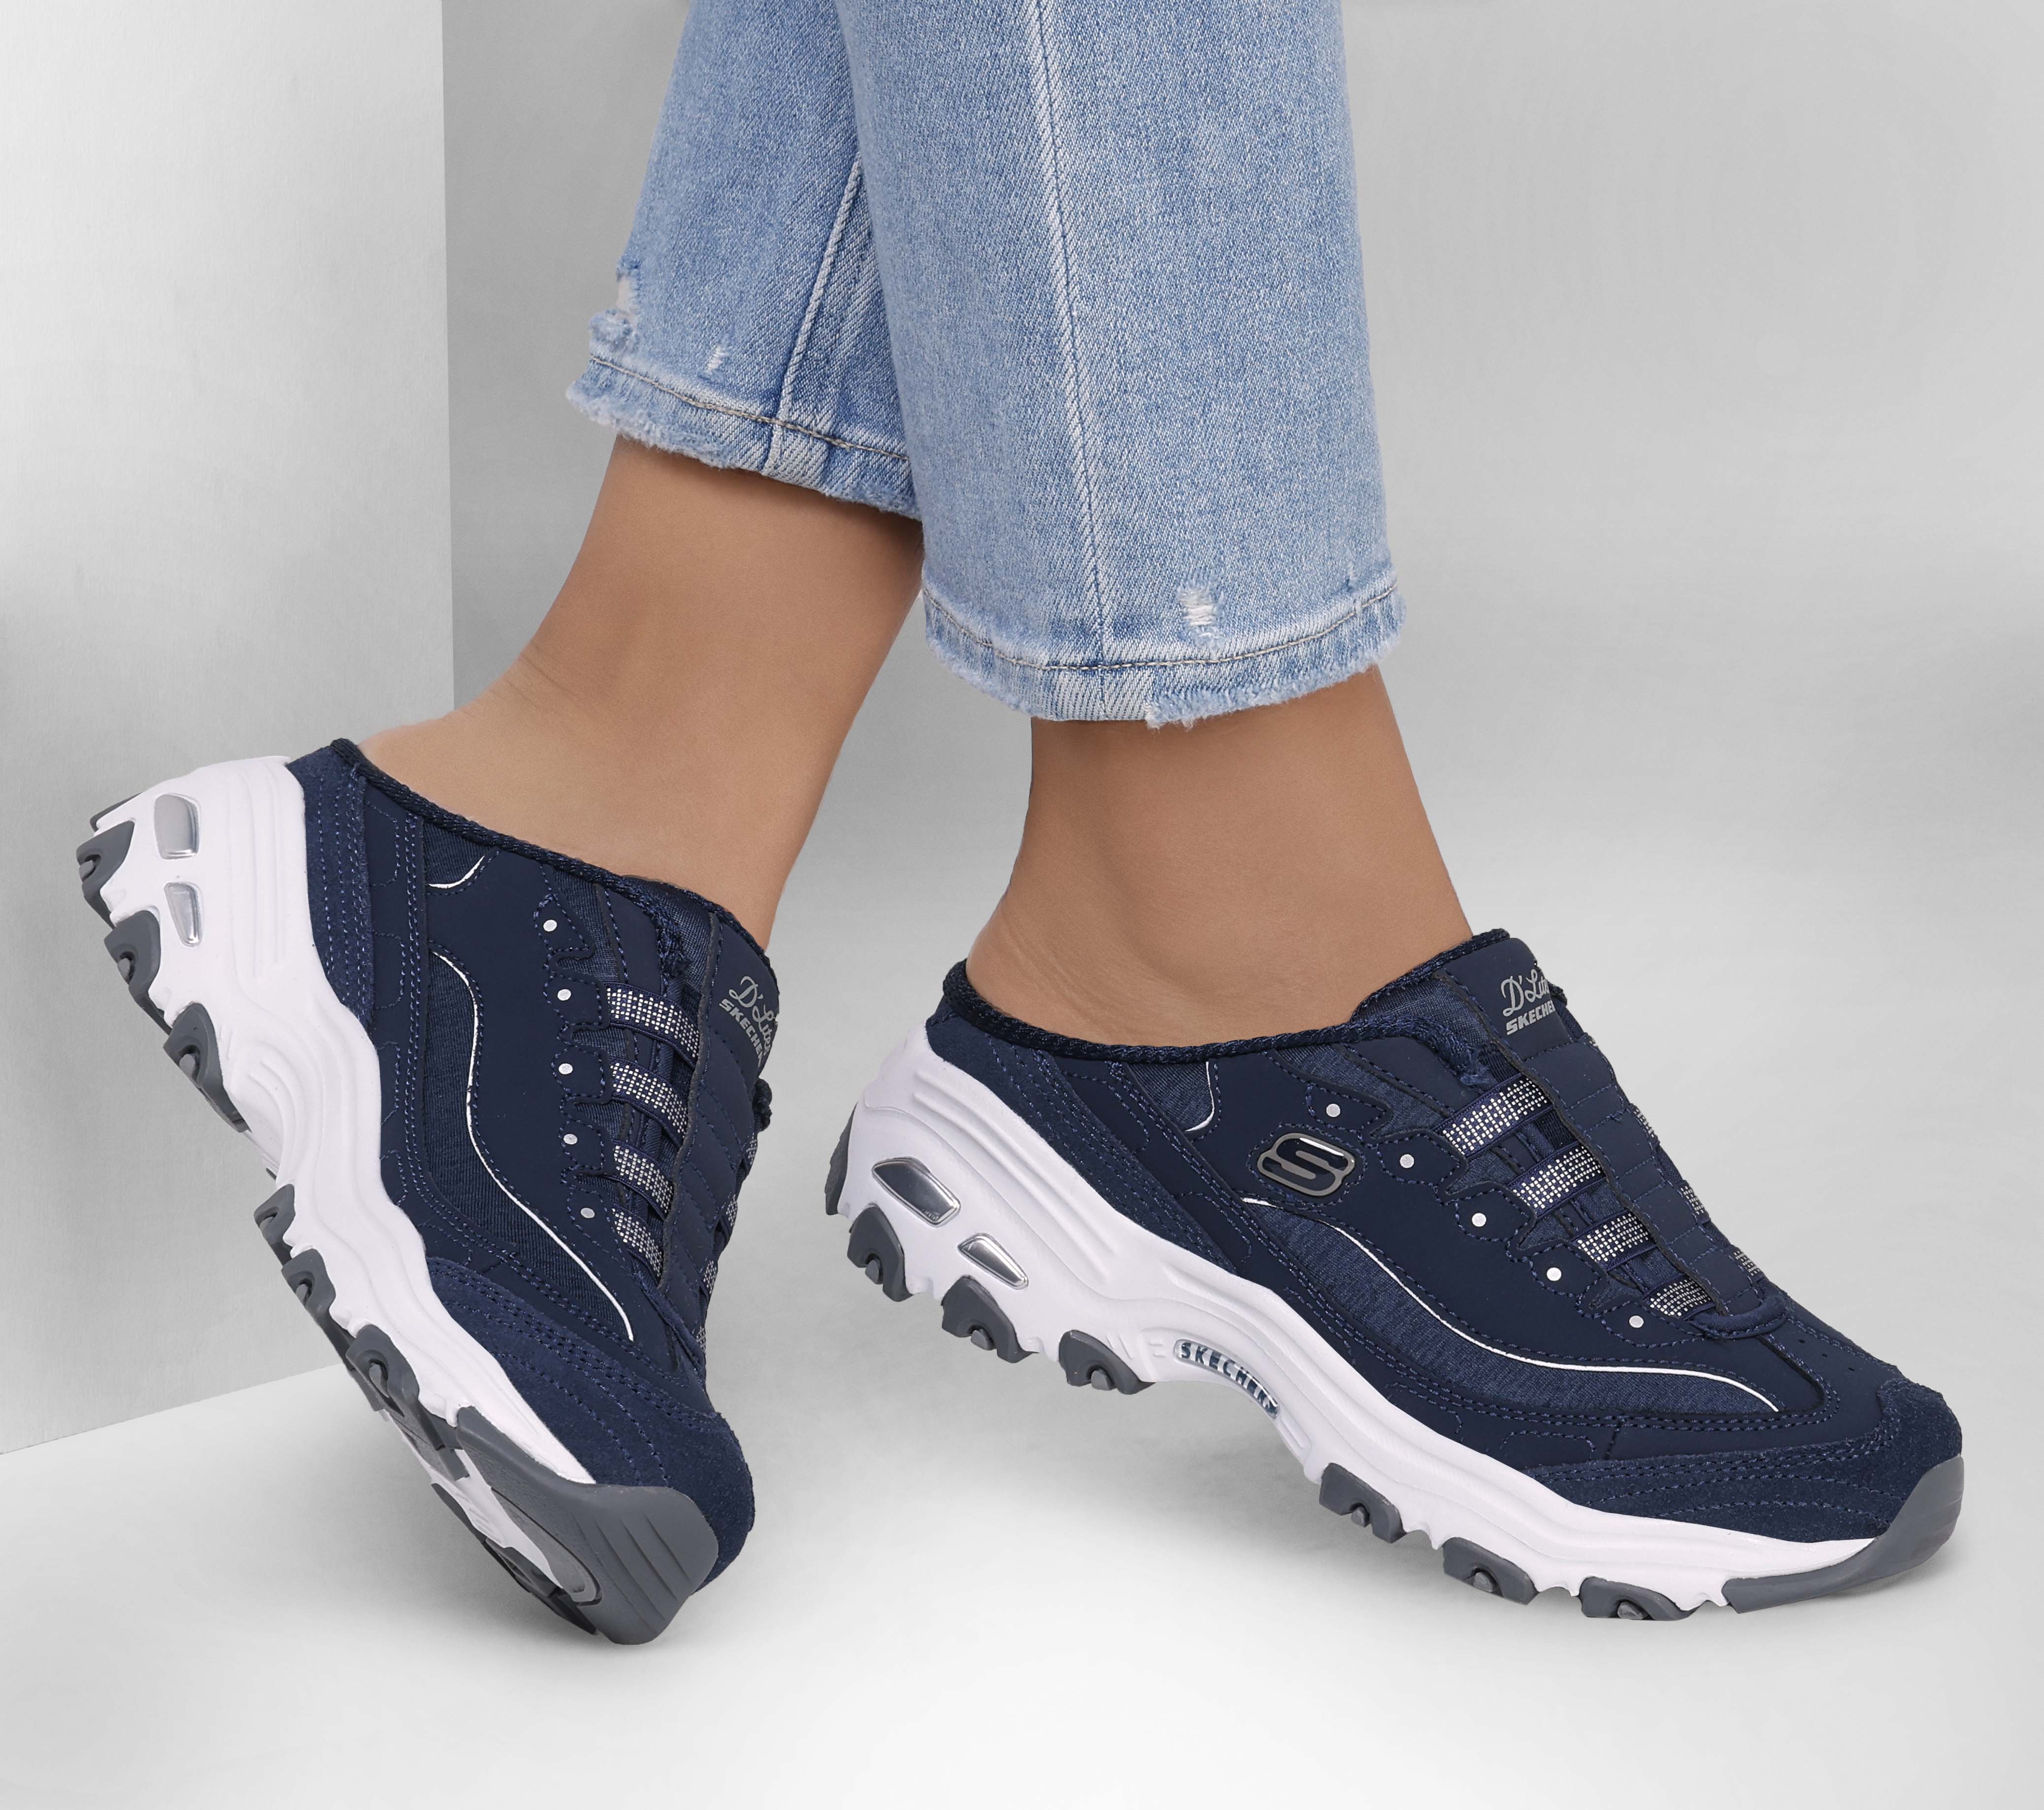 Skechers Curacao - Skechers D'Lites 4.0 - Cool Steps Add some high